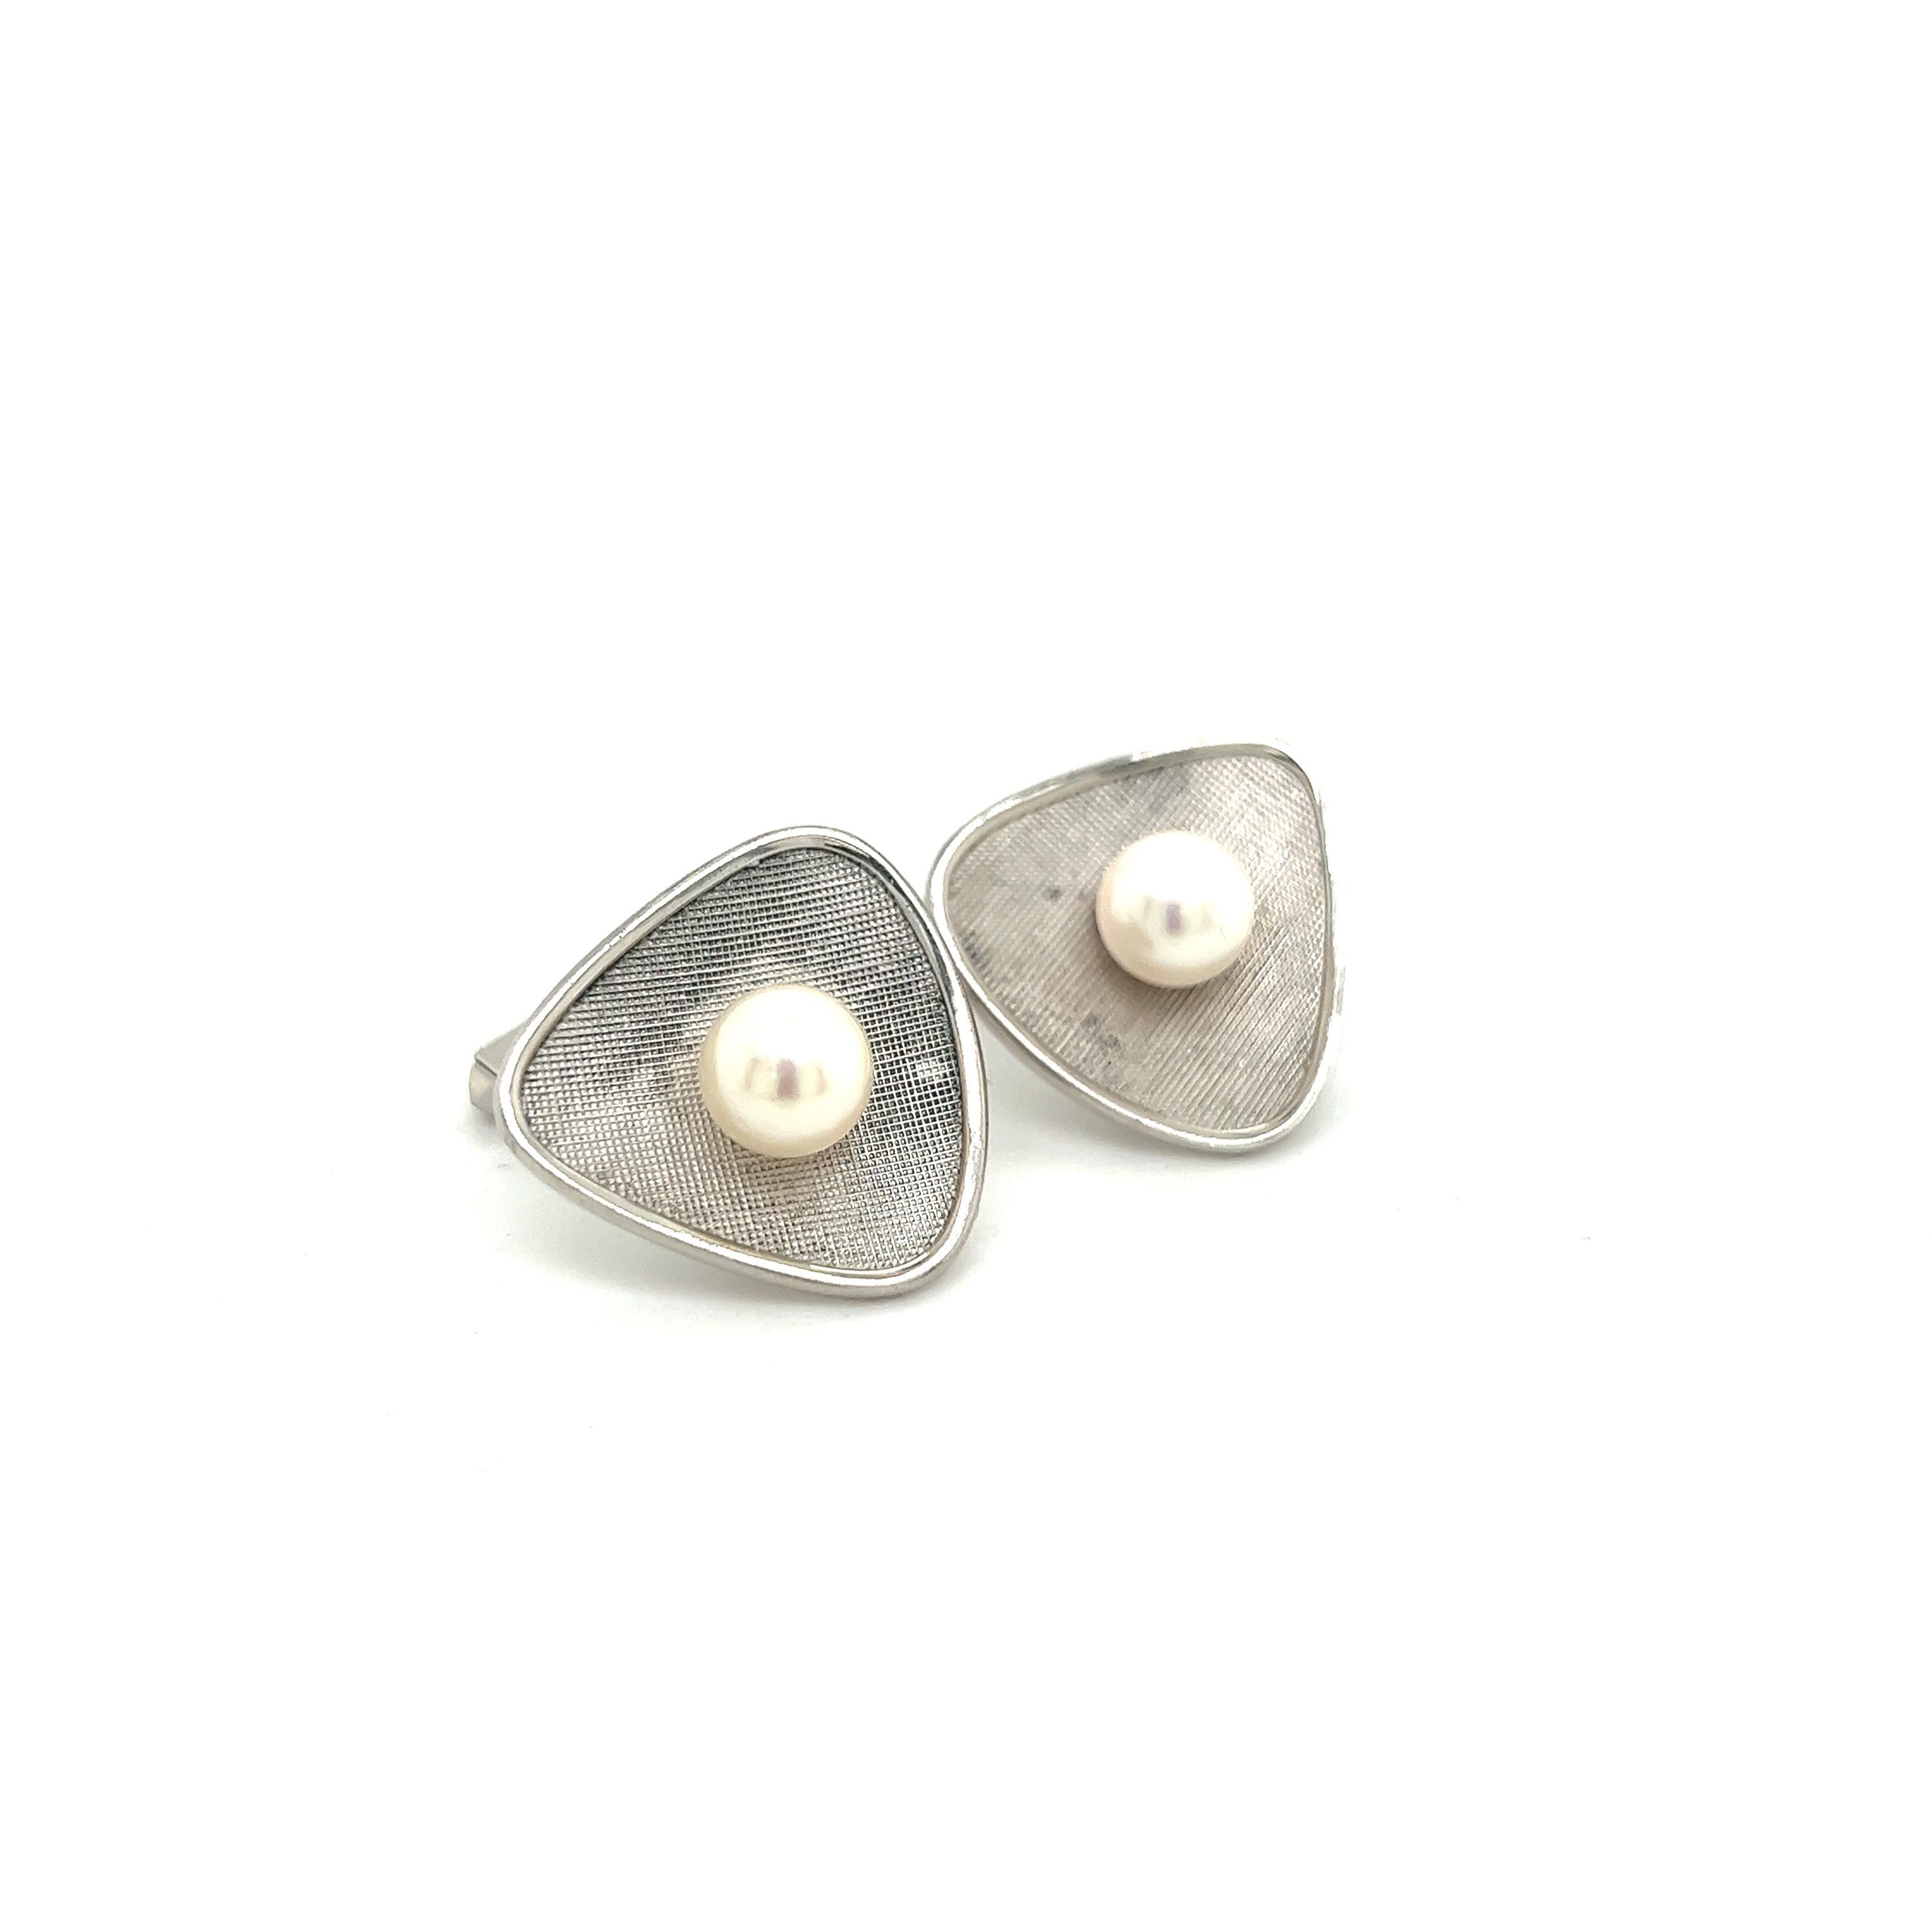 Mikimoto Estate Akoya Pearl Cufflinks 7.45 mm Silver M293

These elegant Authentic Mikimoto Estate Akoya pearl cufflinks are made of sterling silver and have 2 Akoya Cultured Pearls.

TRUSTED SELLER SINCE 2002

PLEASE SEE OUR HUNDREDS OF POSITIVE